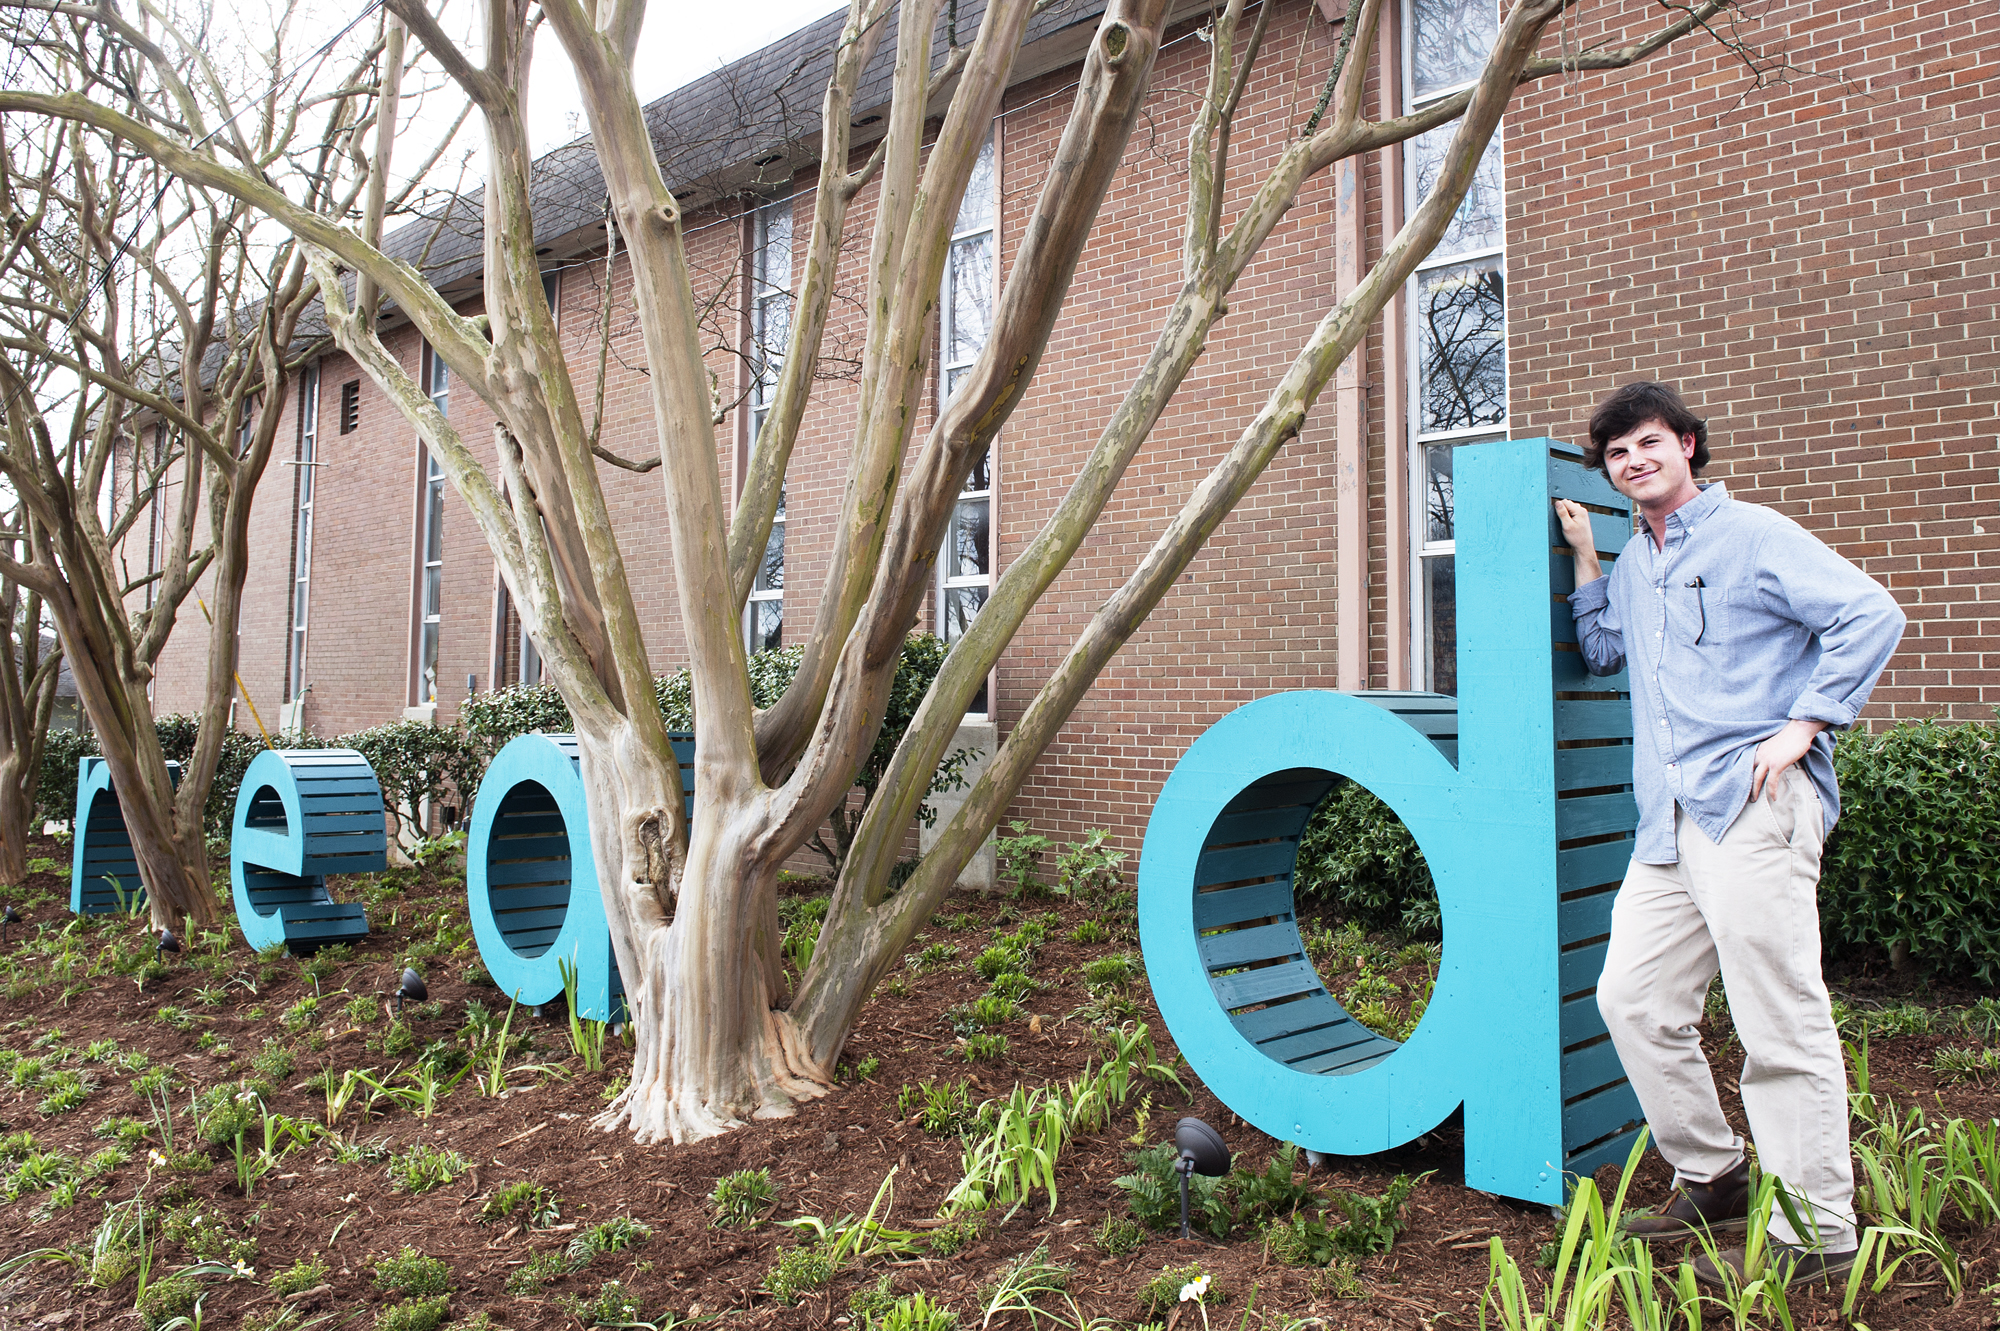 Mississippi State University senior landscape architecture major Travis R. Crabtree, a Dawn Brancheau Service-Learning Scholar, celebrates the unveiling of the new sign he designed for Starkville Public Library.